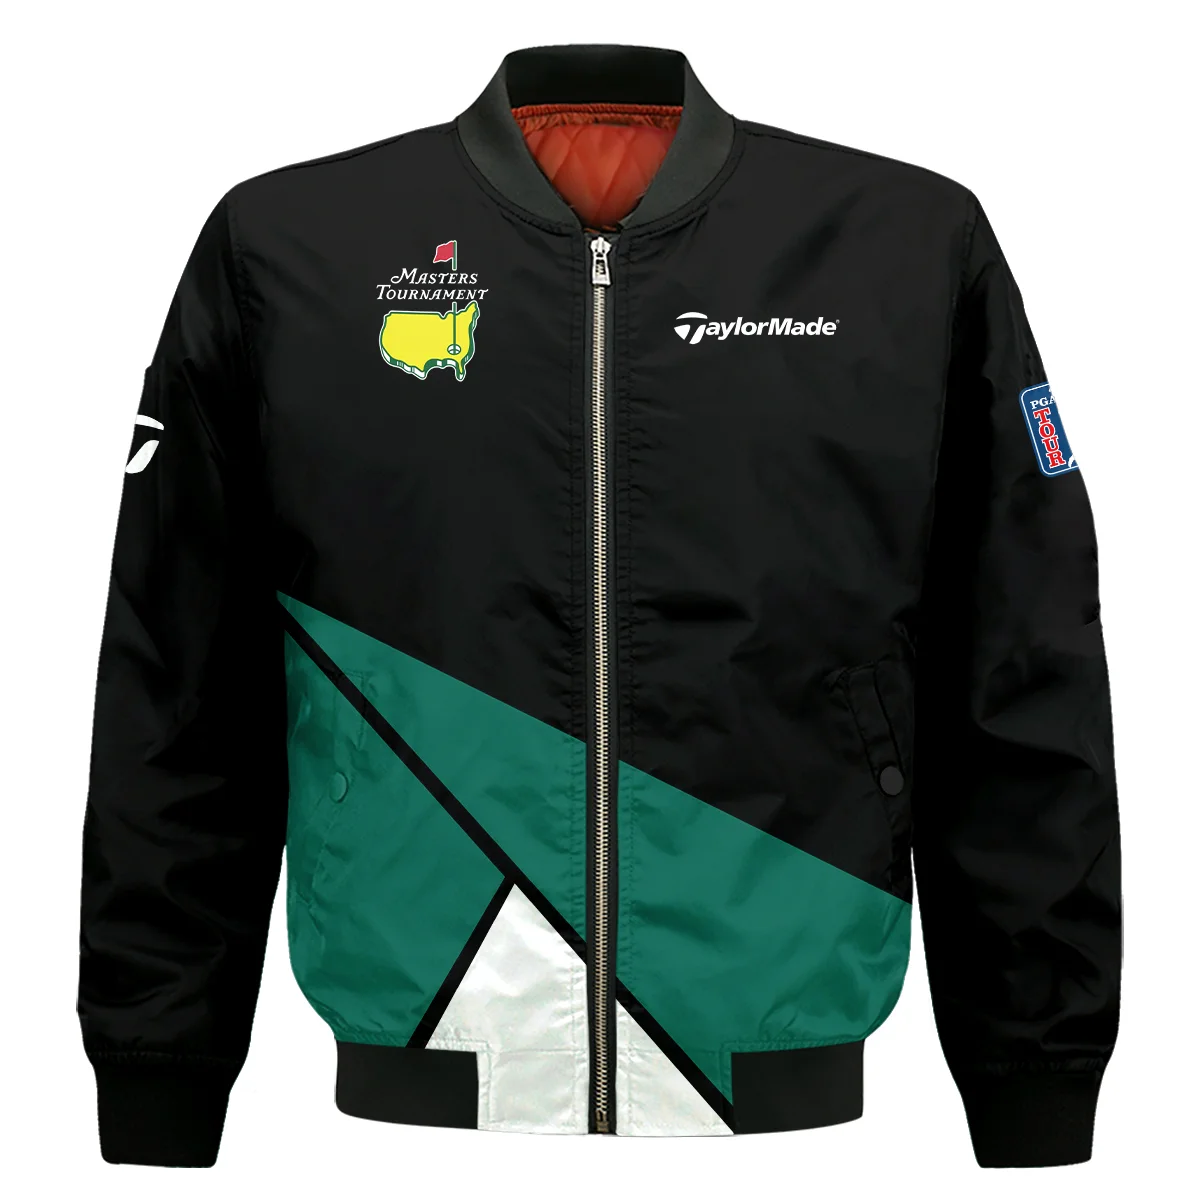 Golf Masters Tournament Taylor Made Bomber Jacket Black And Green Golf Sports Bomber Jacket GBJ1379